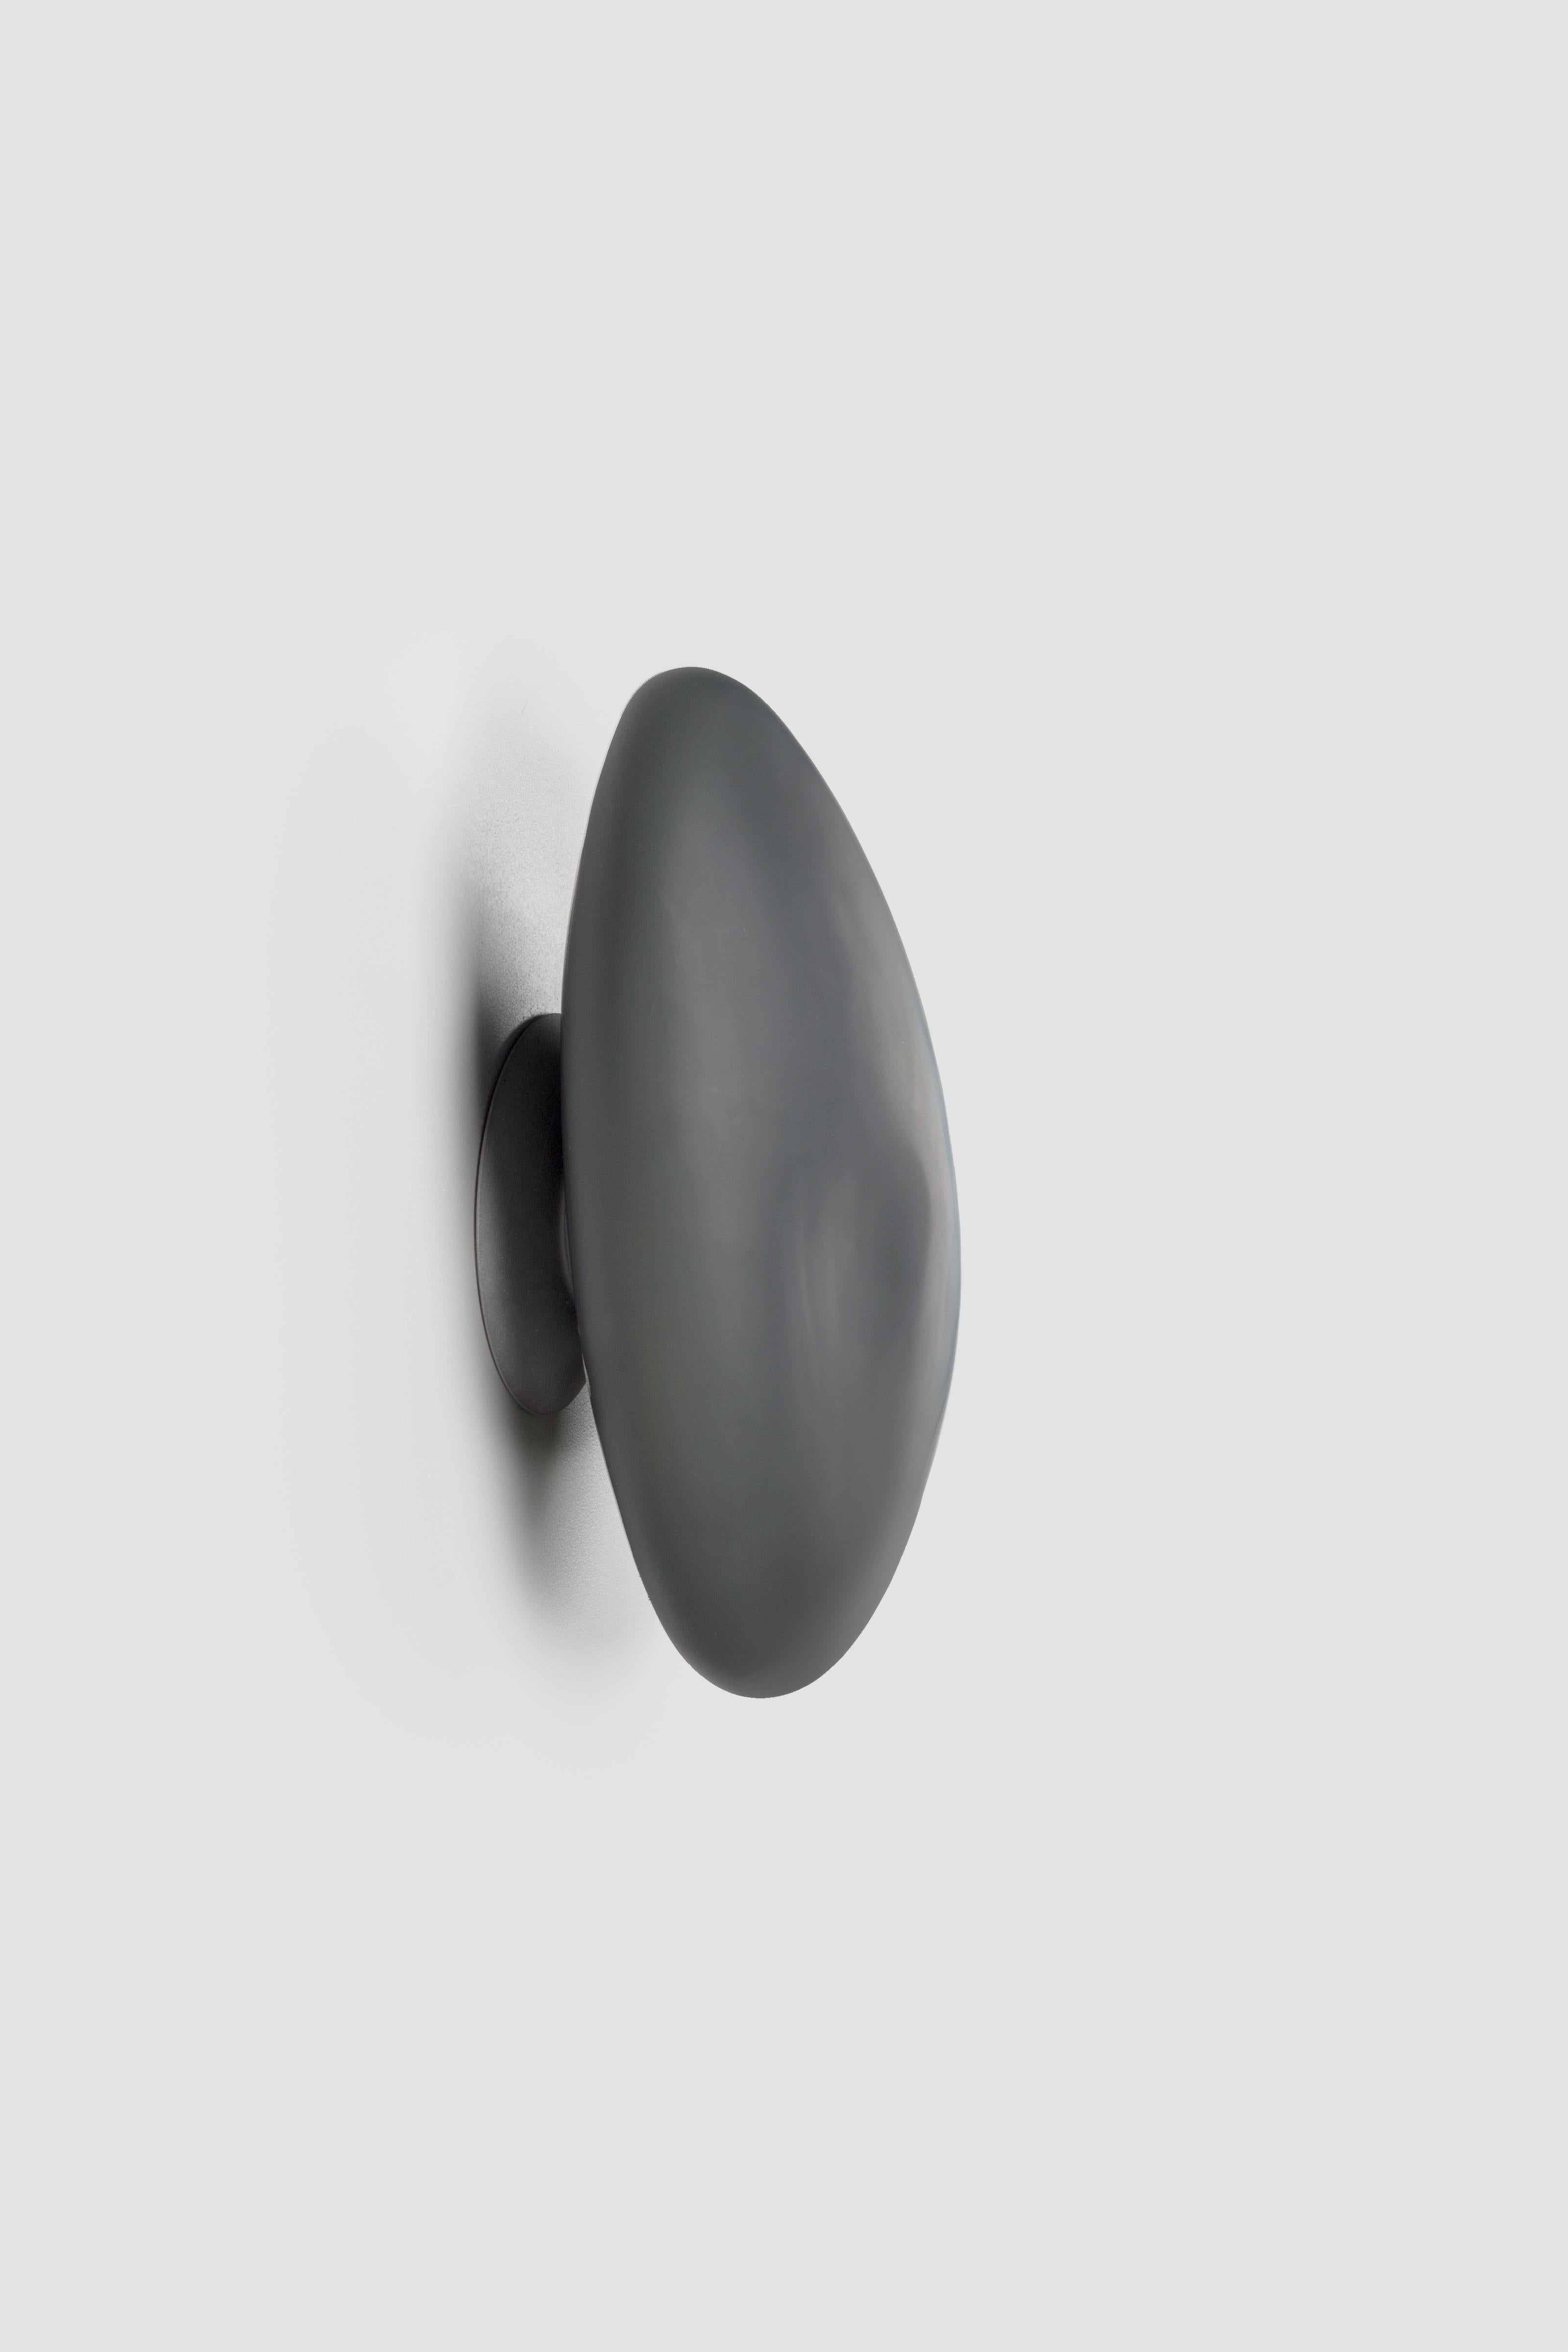 Contemporary Wall Lamp 'Pebble' by Andlight, Shape B, Slate In New Condition For Sale In Paris, FR